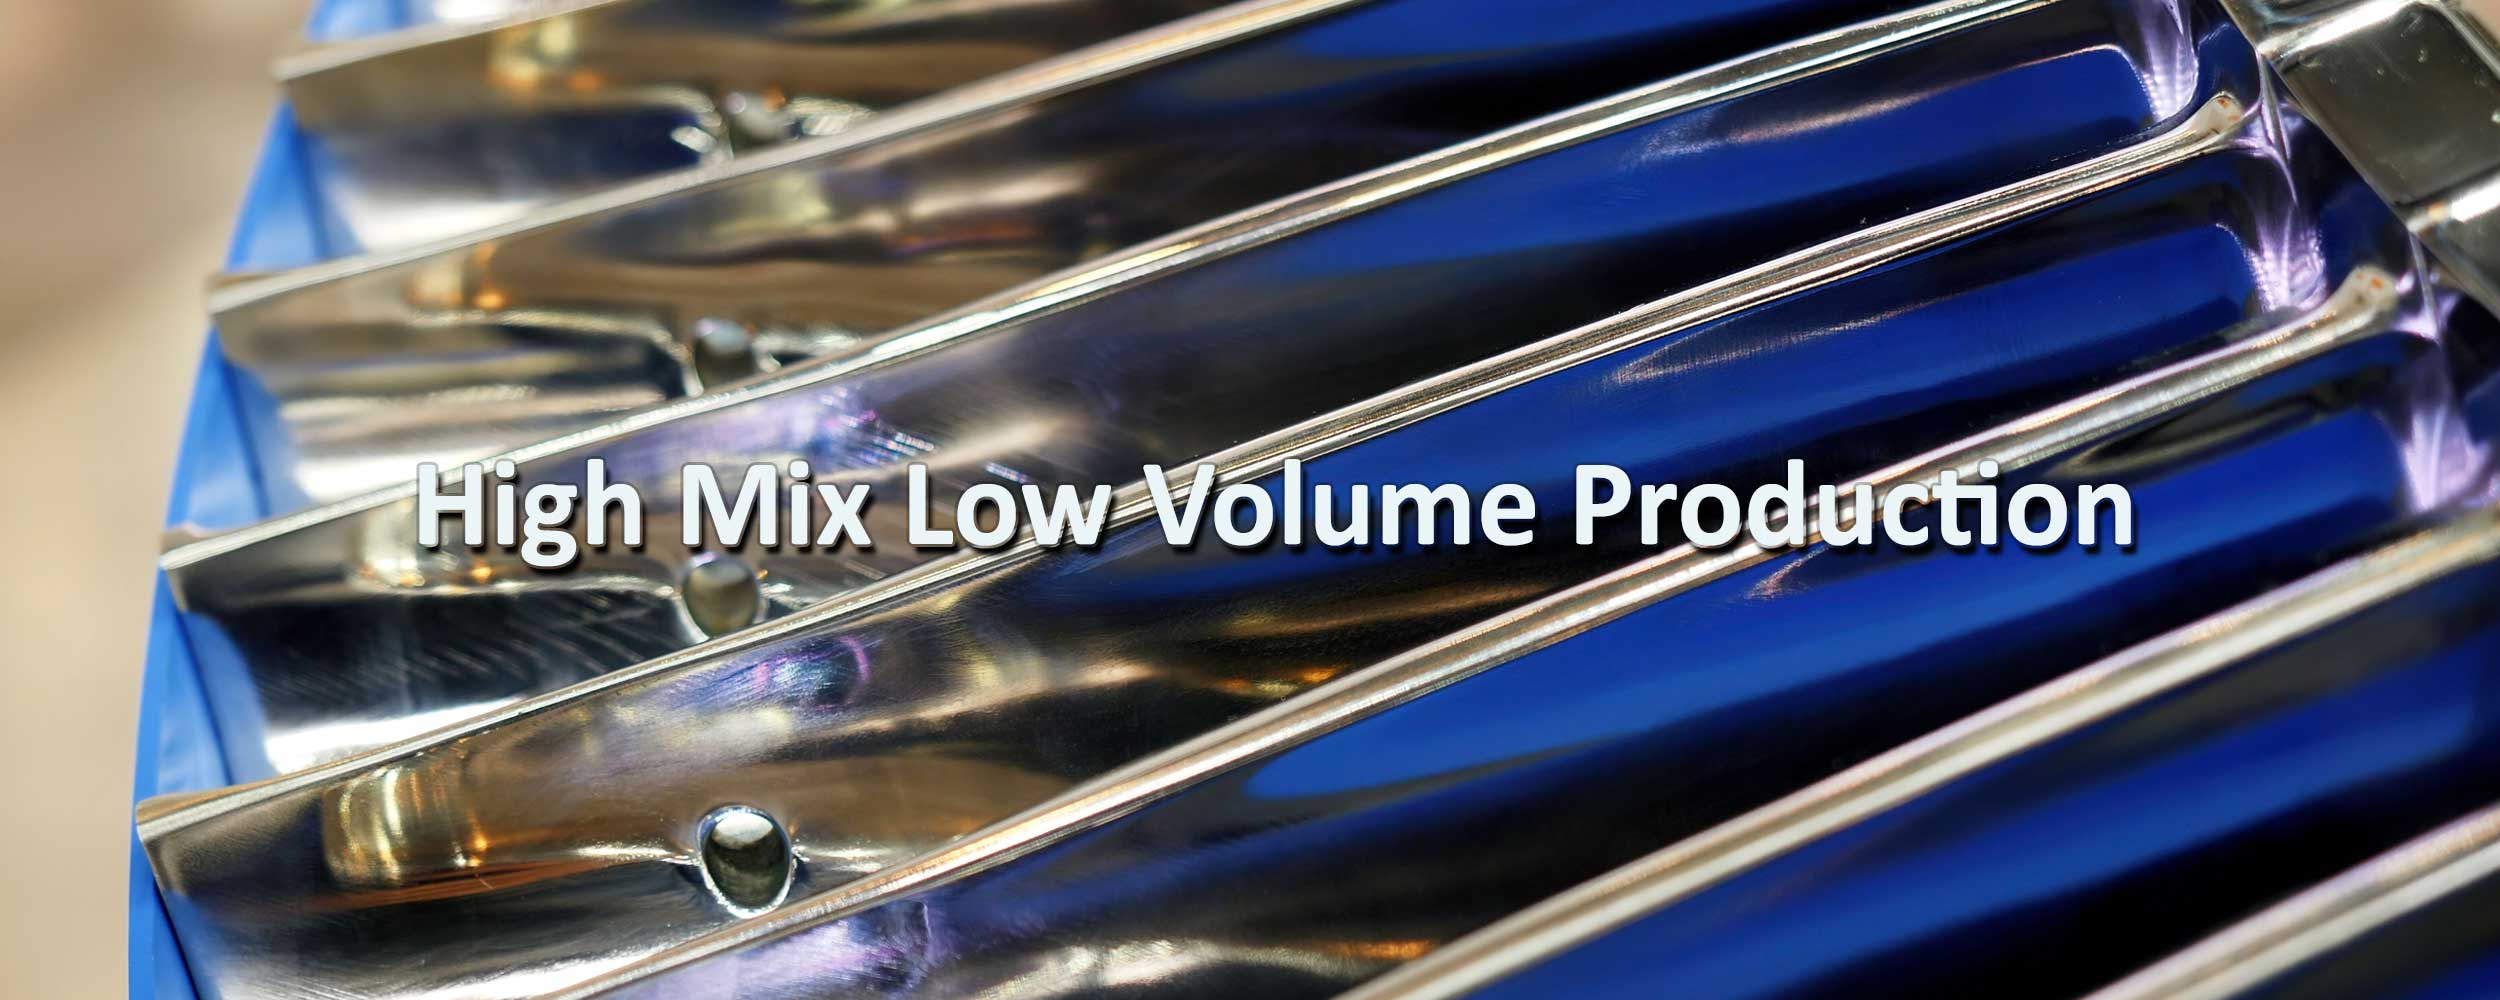 High Mix Low Volume Production